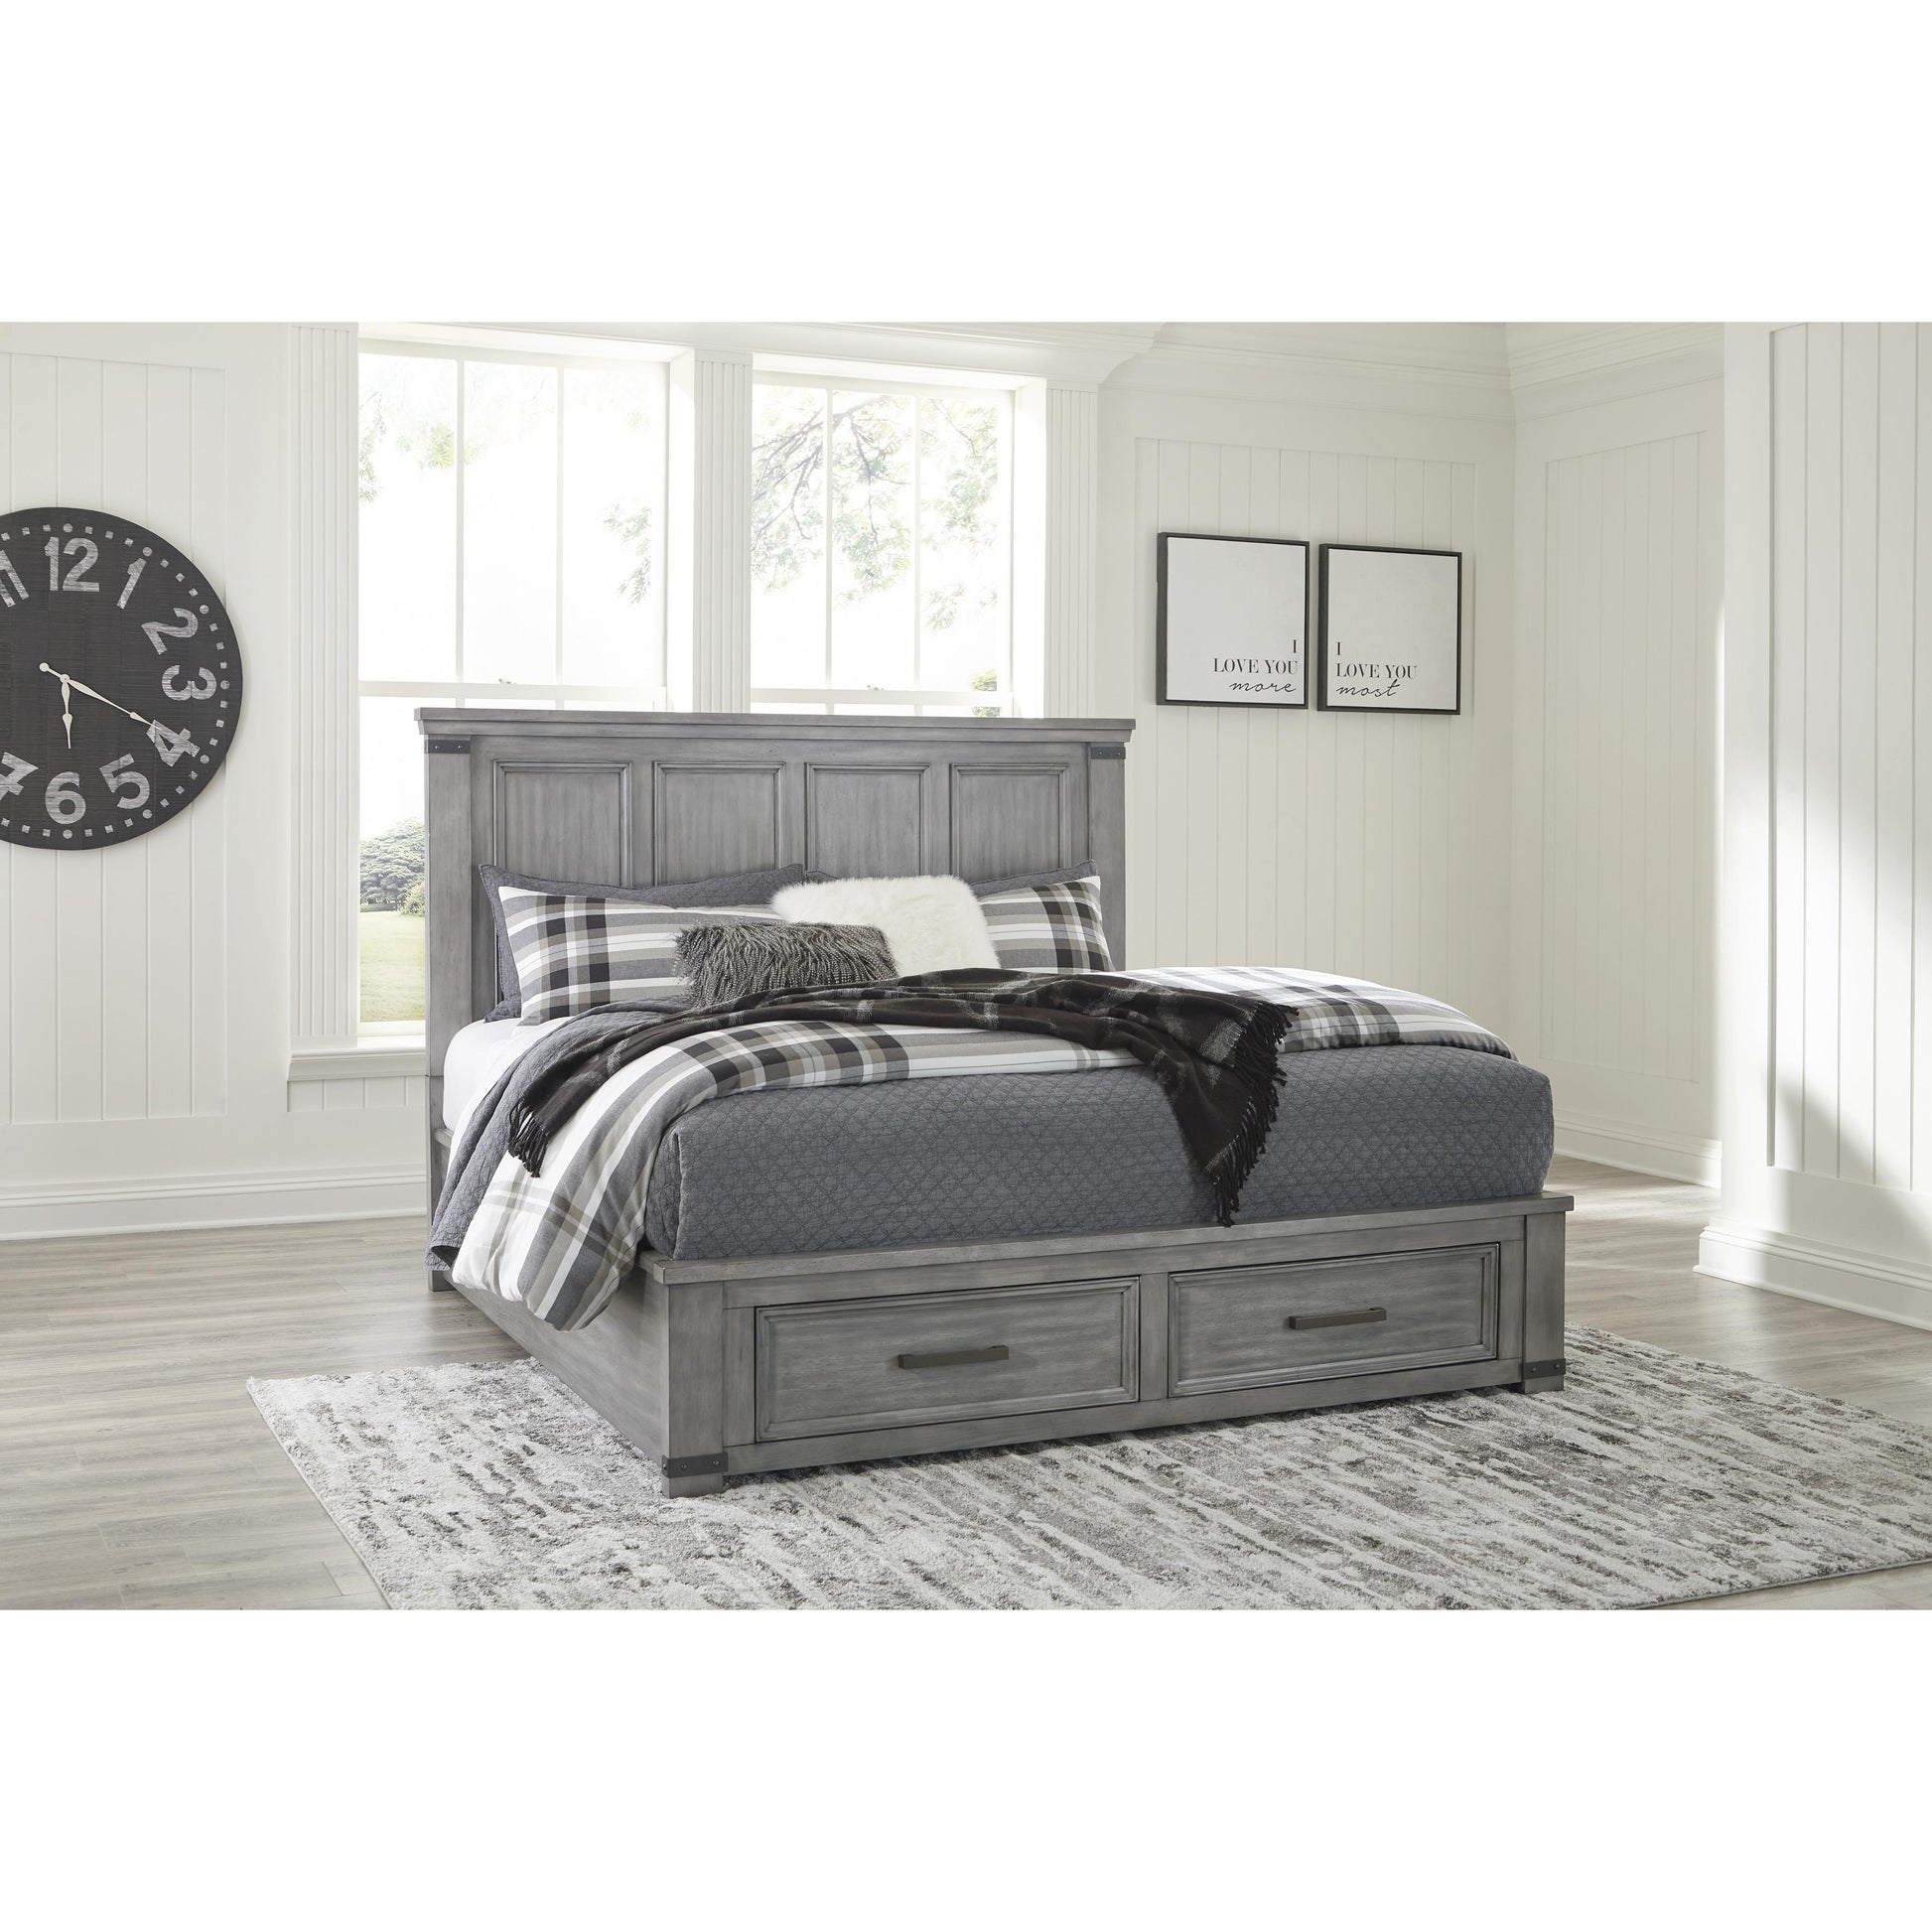 Signature Design by Ashley Russelyn Queen Panel Bed with Storage B772-57/B772-54S/B772-96 IMAGE 5